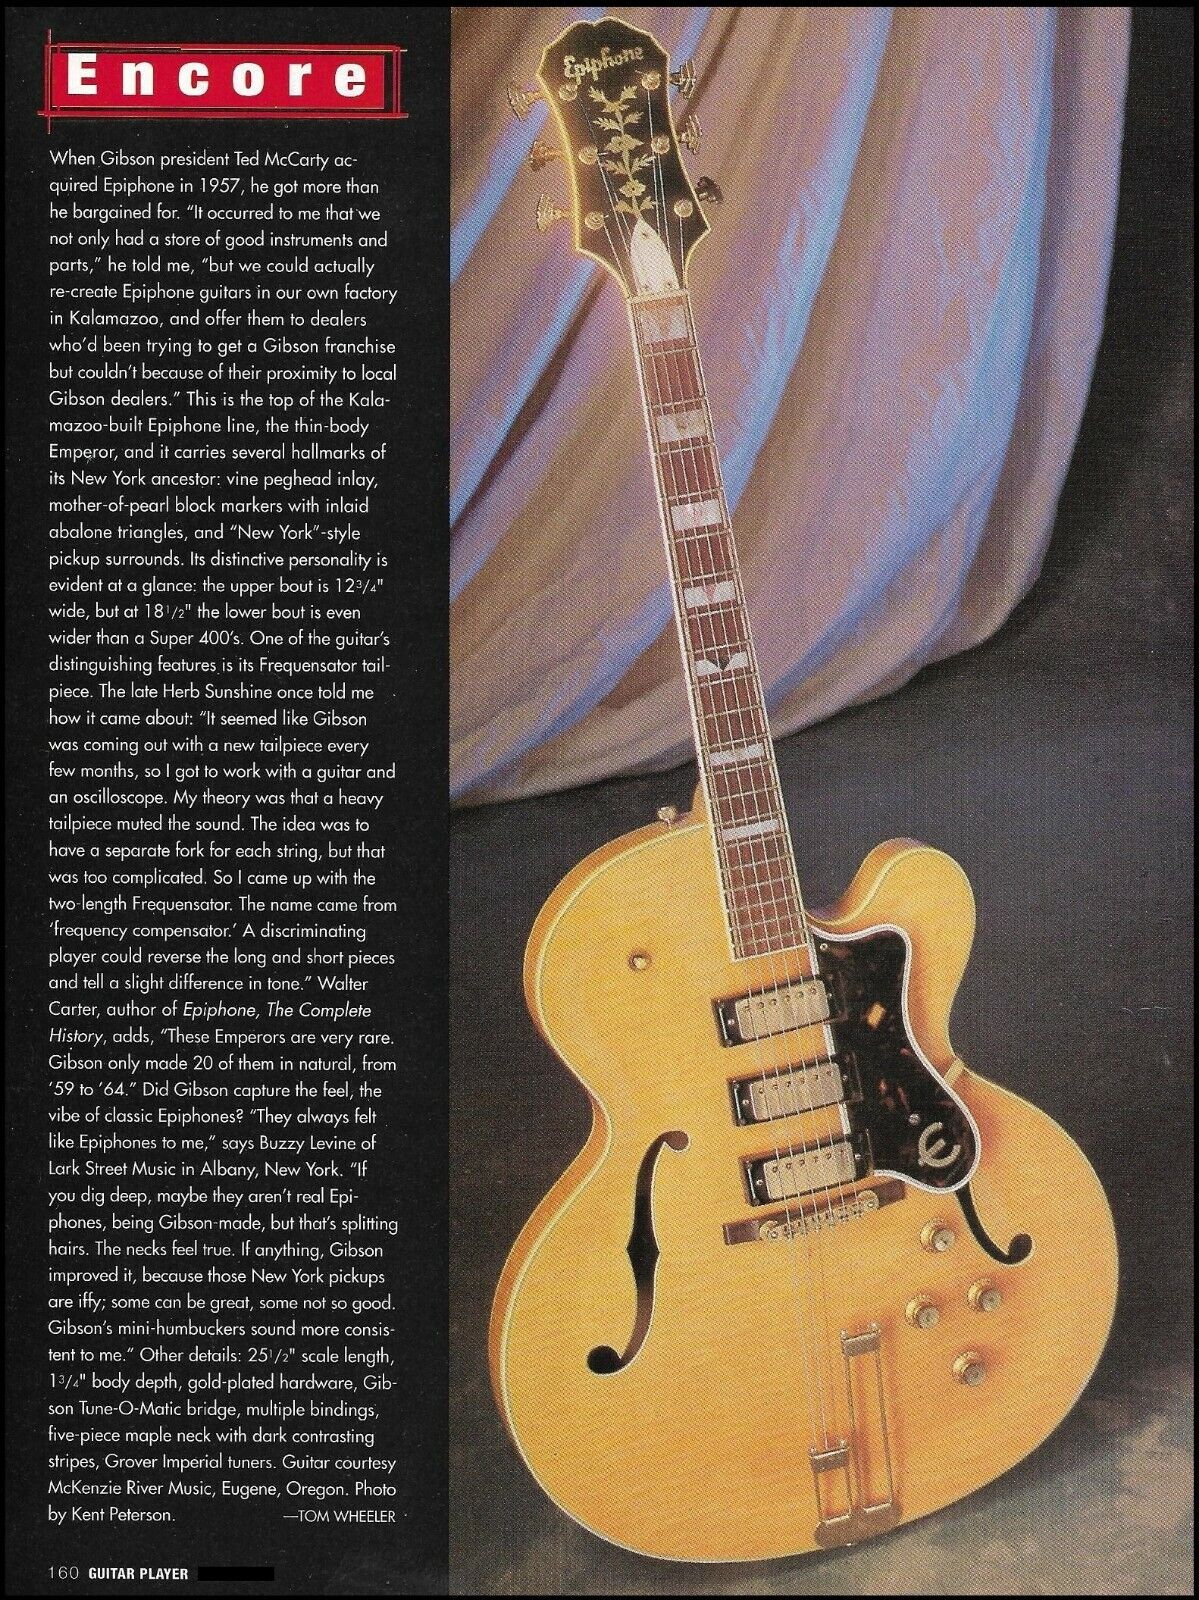 The 1959 Epiphone Emperor vintage guitar 1997 history article / pin-up photo